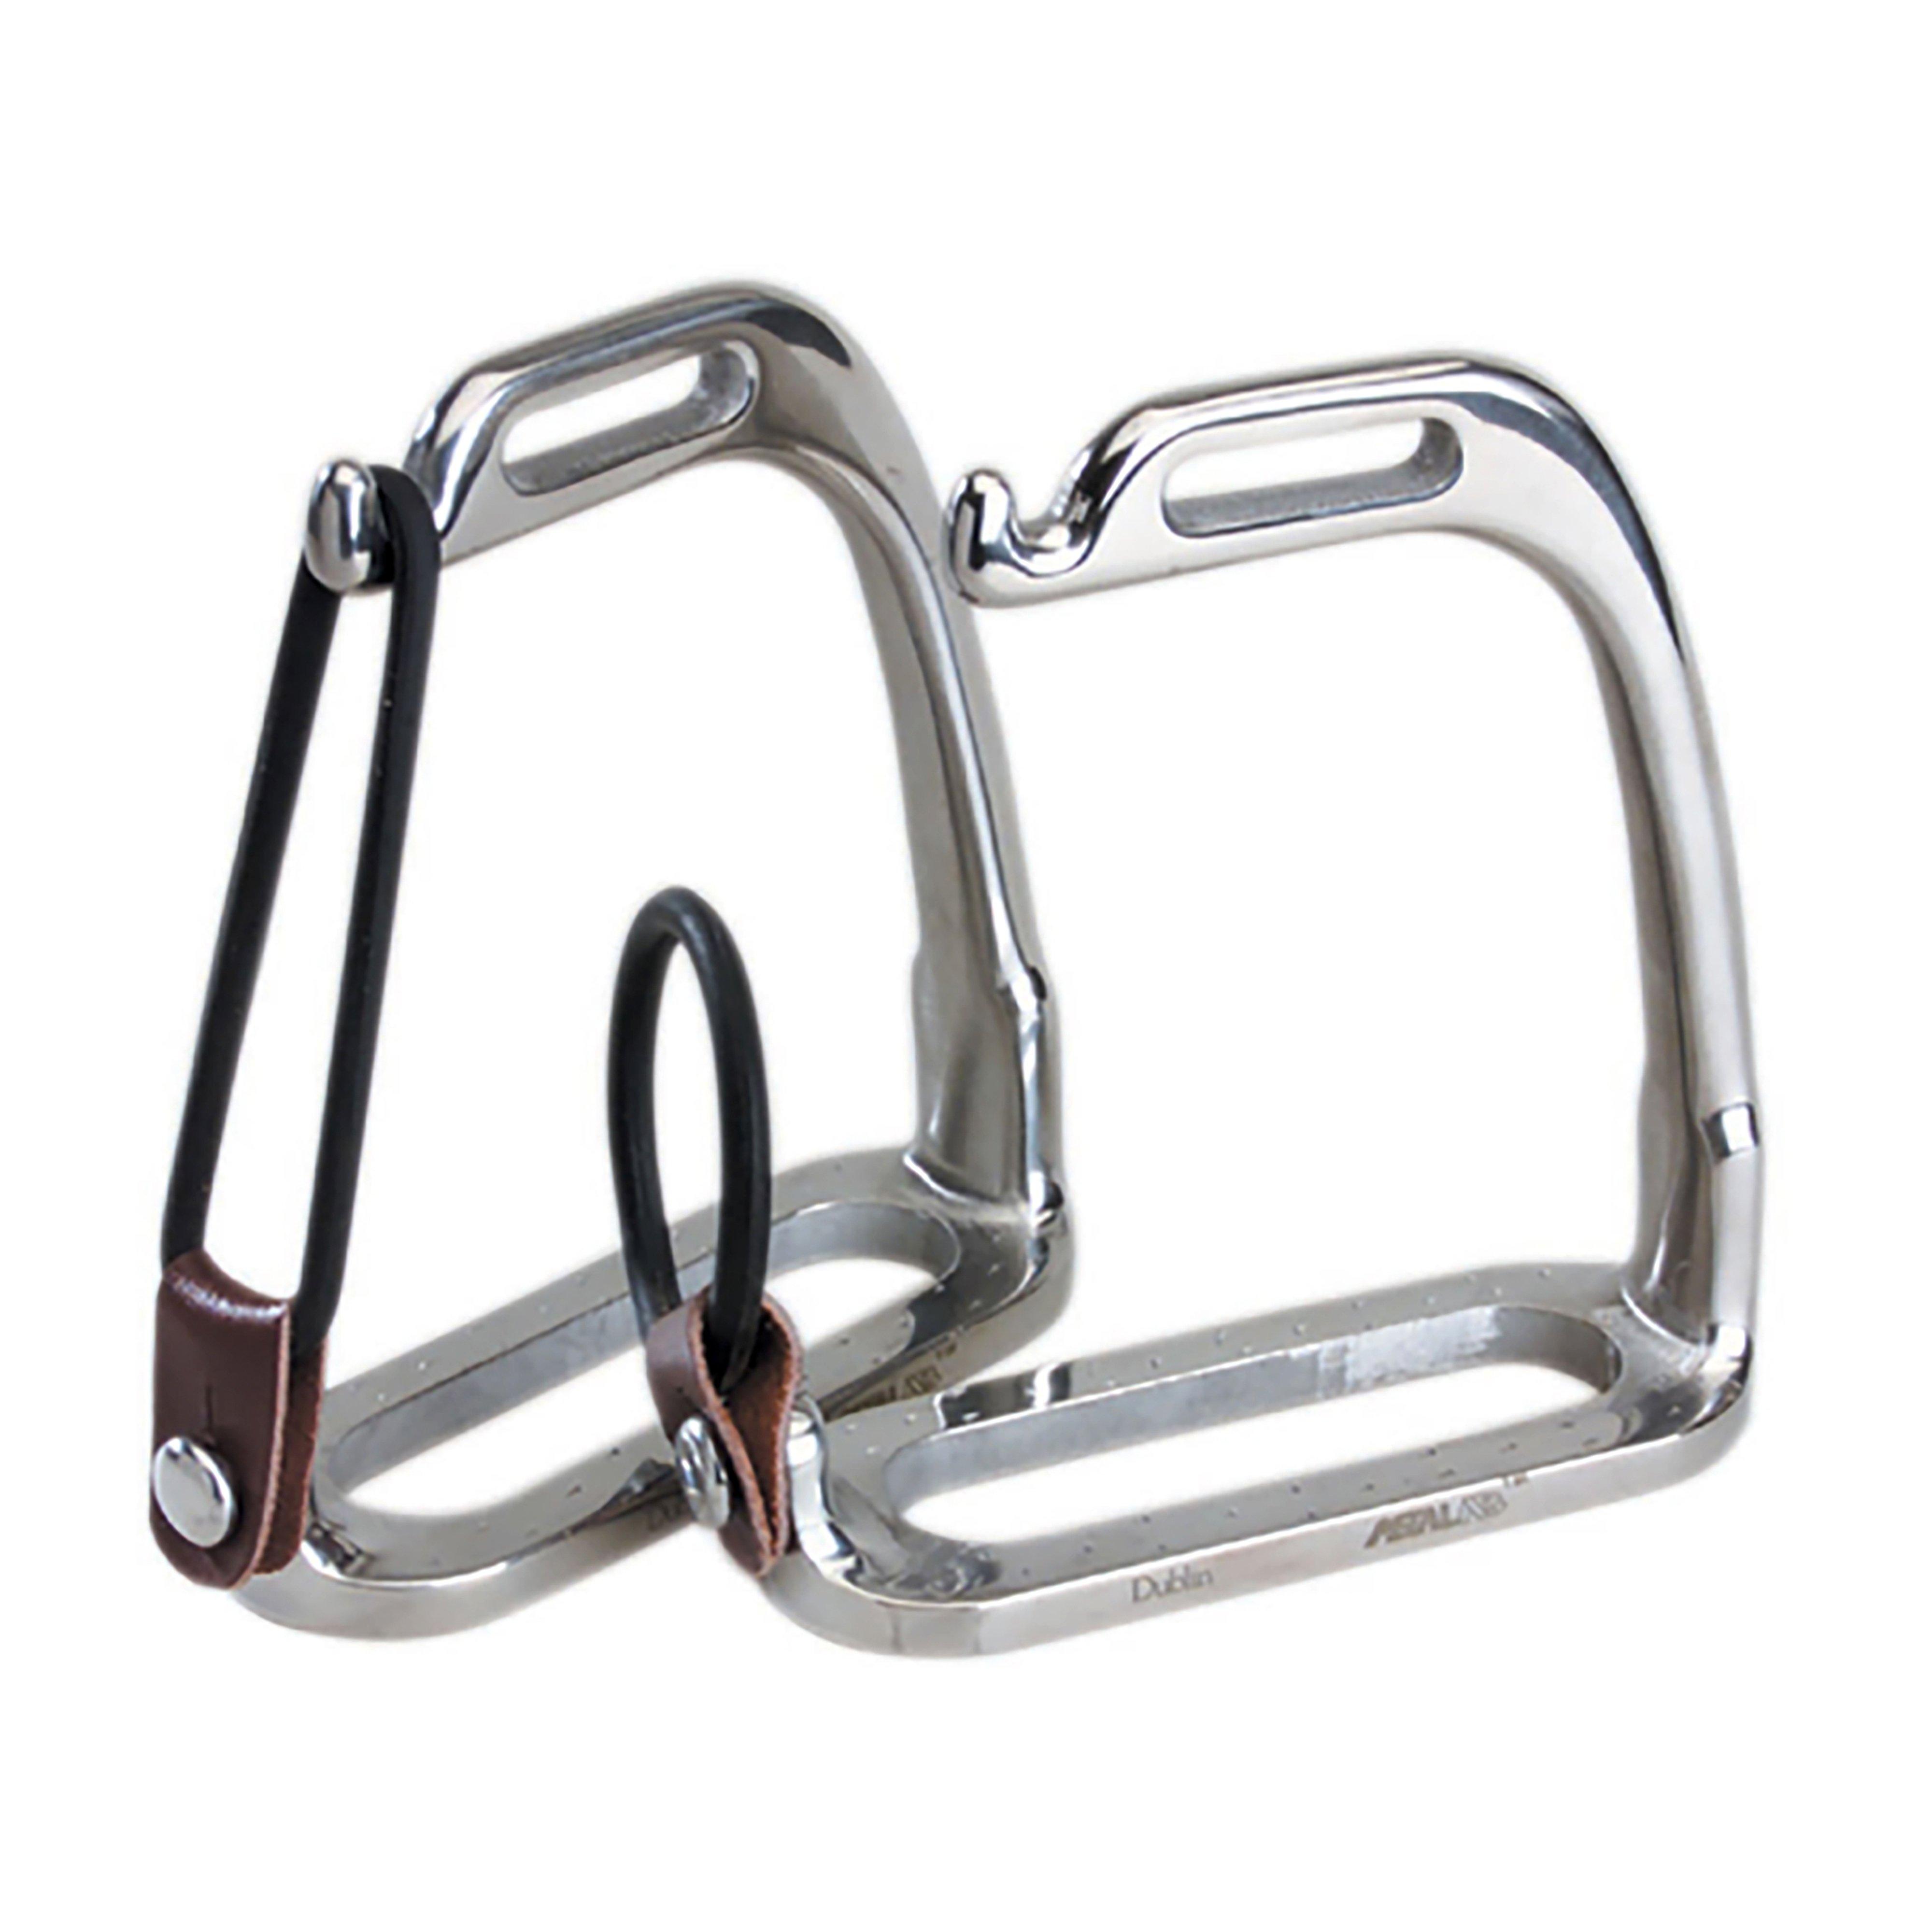 Peacock Safety Stirrup Irons